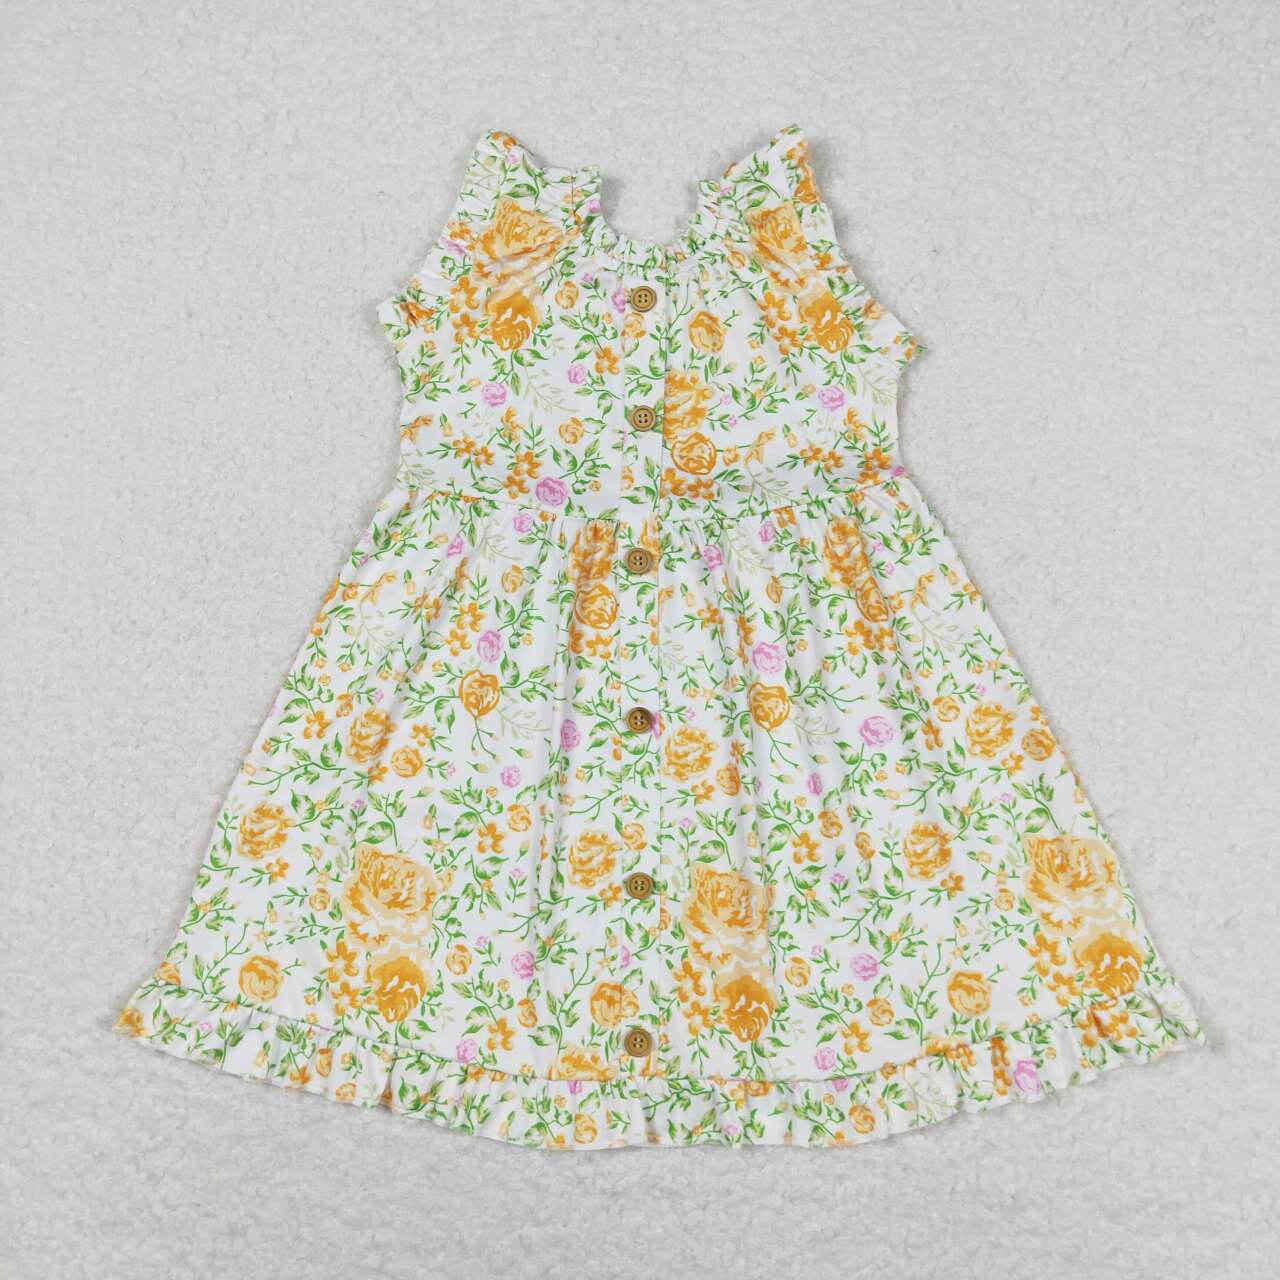 Orange Flowers Print Sisters Summer Matching Clothes